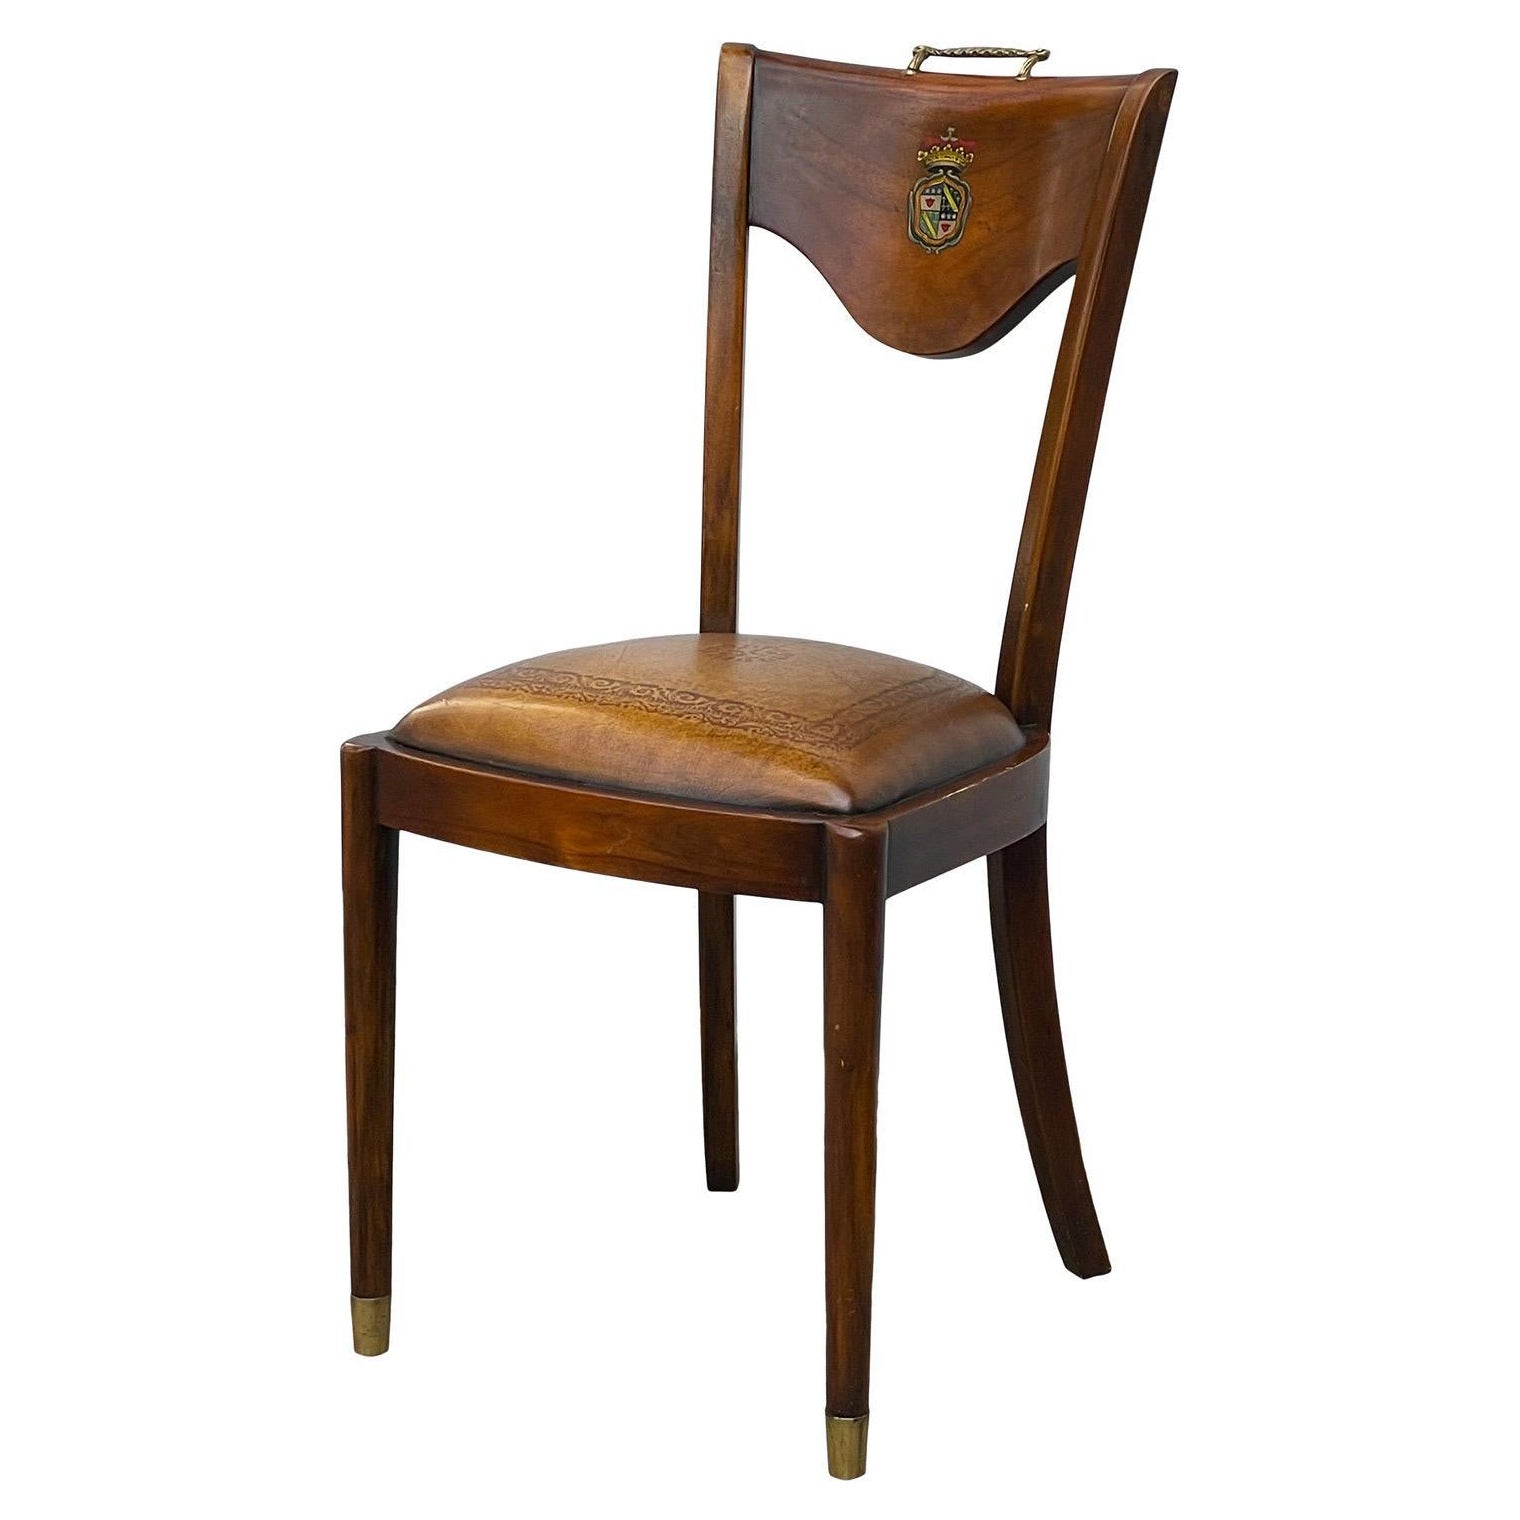 Ralph Lauren Embossed Leather & Wood Side or Desk Chair